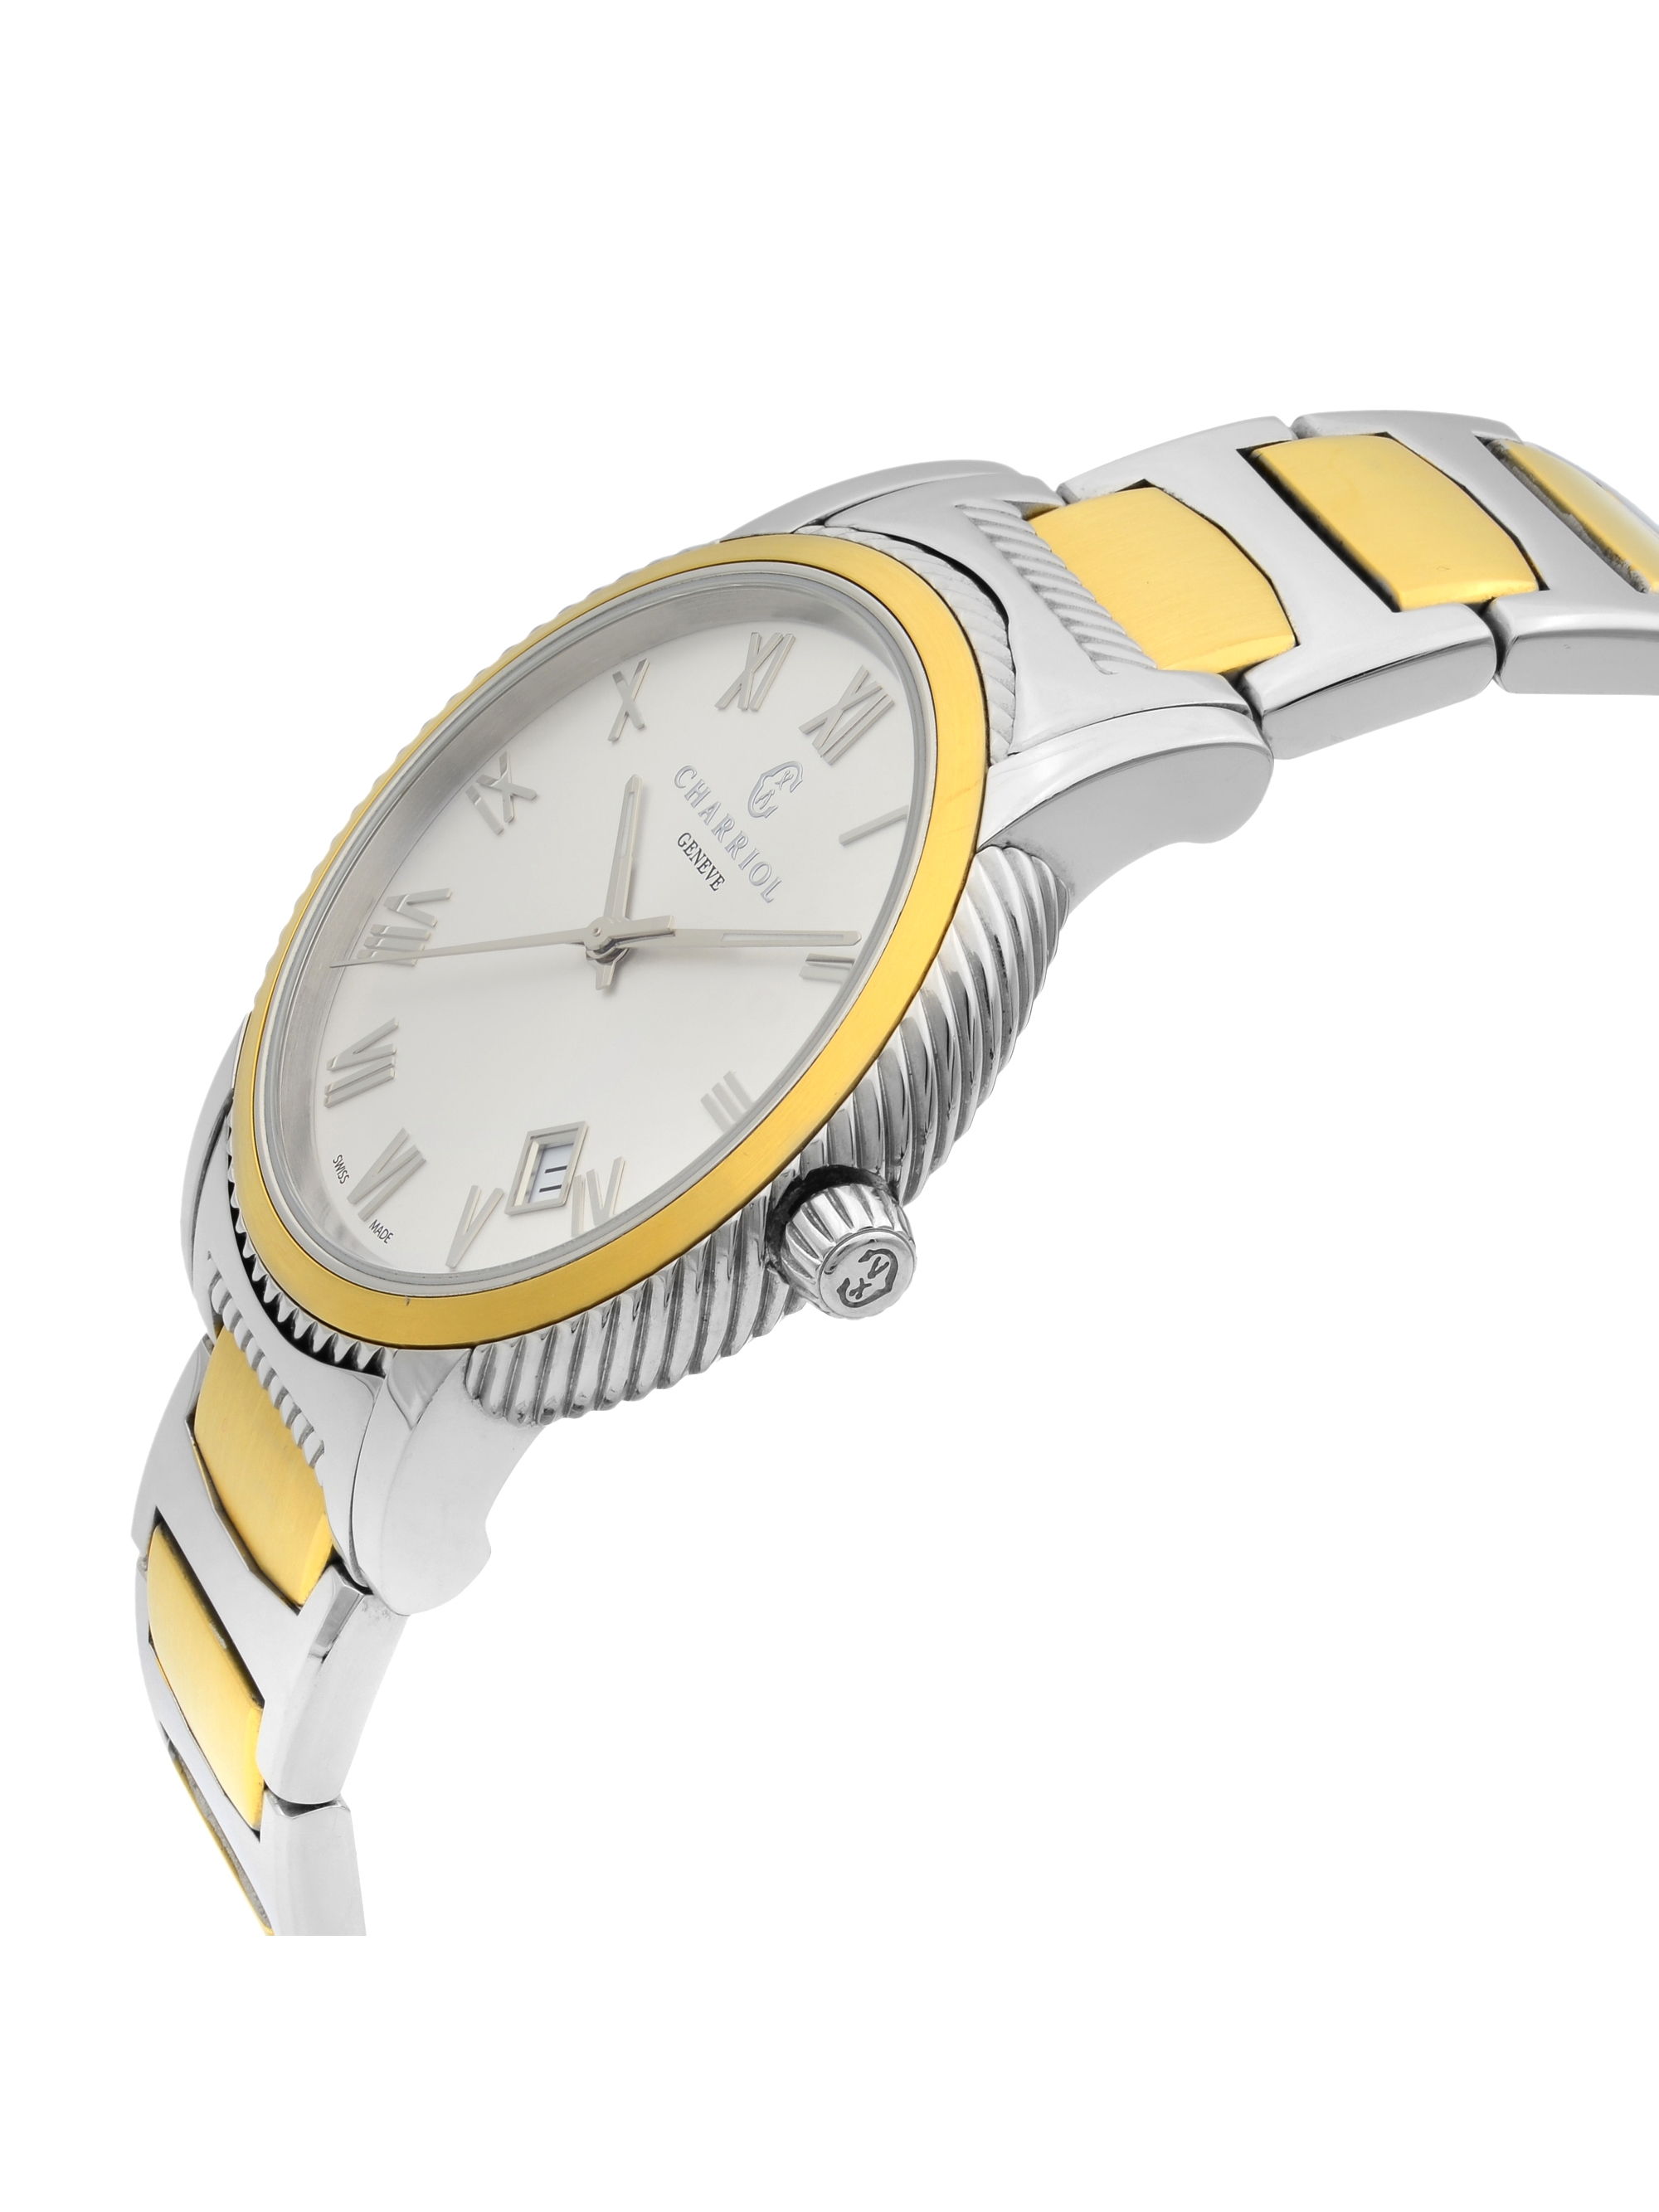 Charriol Parisii Two Tone Steel Silver Dial Quartz Unisex Watch P40SY2.931.001 Pre-Owned - image 3 of 6